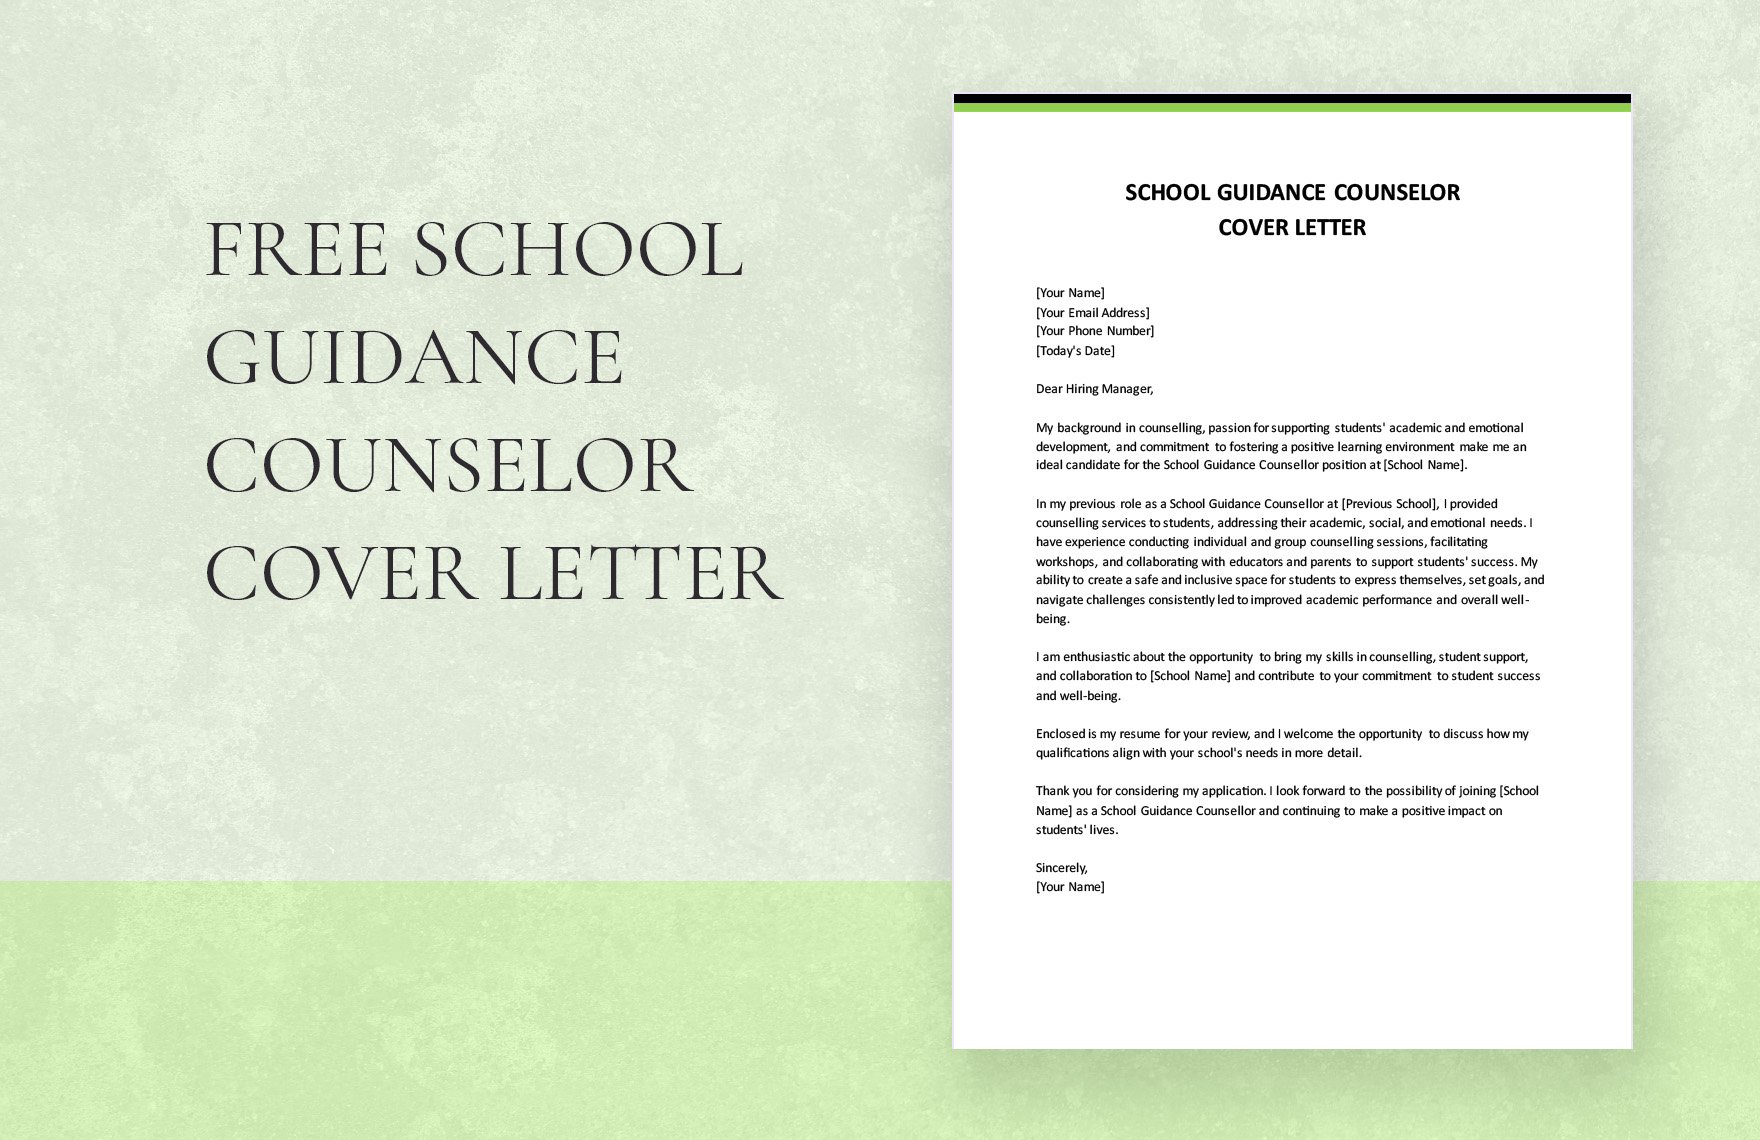 School Guidance Counselor Cover Letter